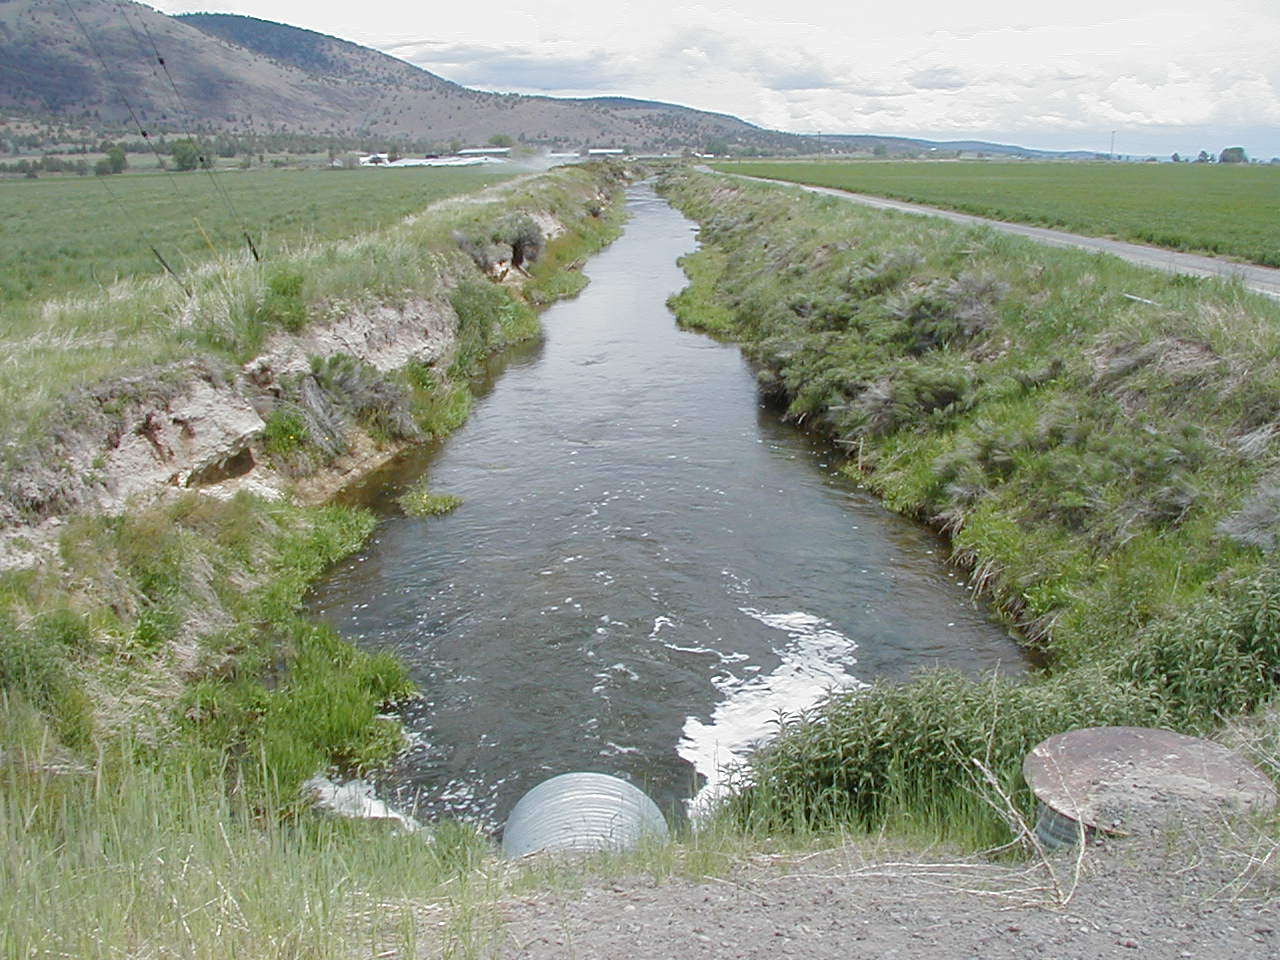 Irrigation canal in Lost River Basin